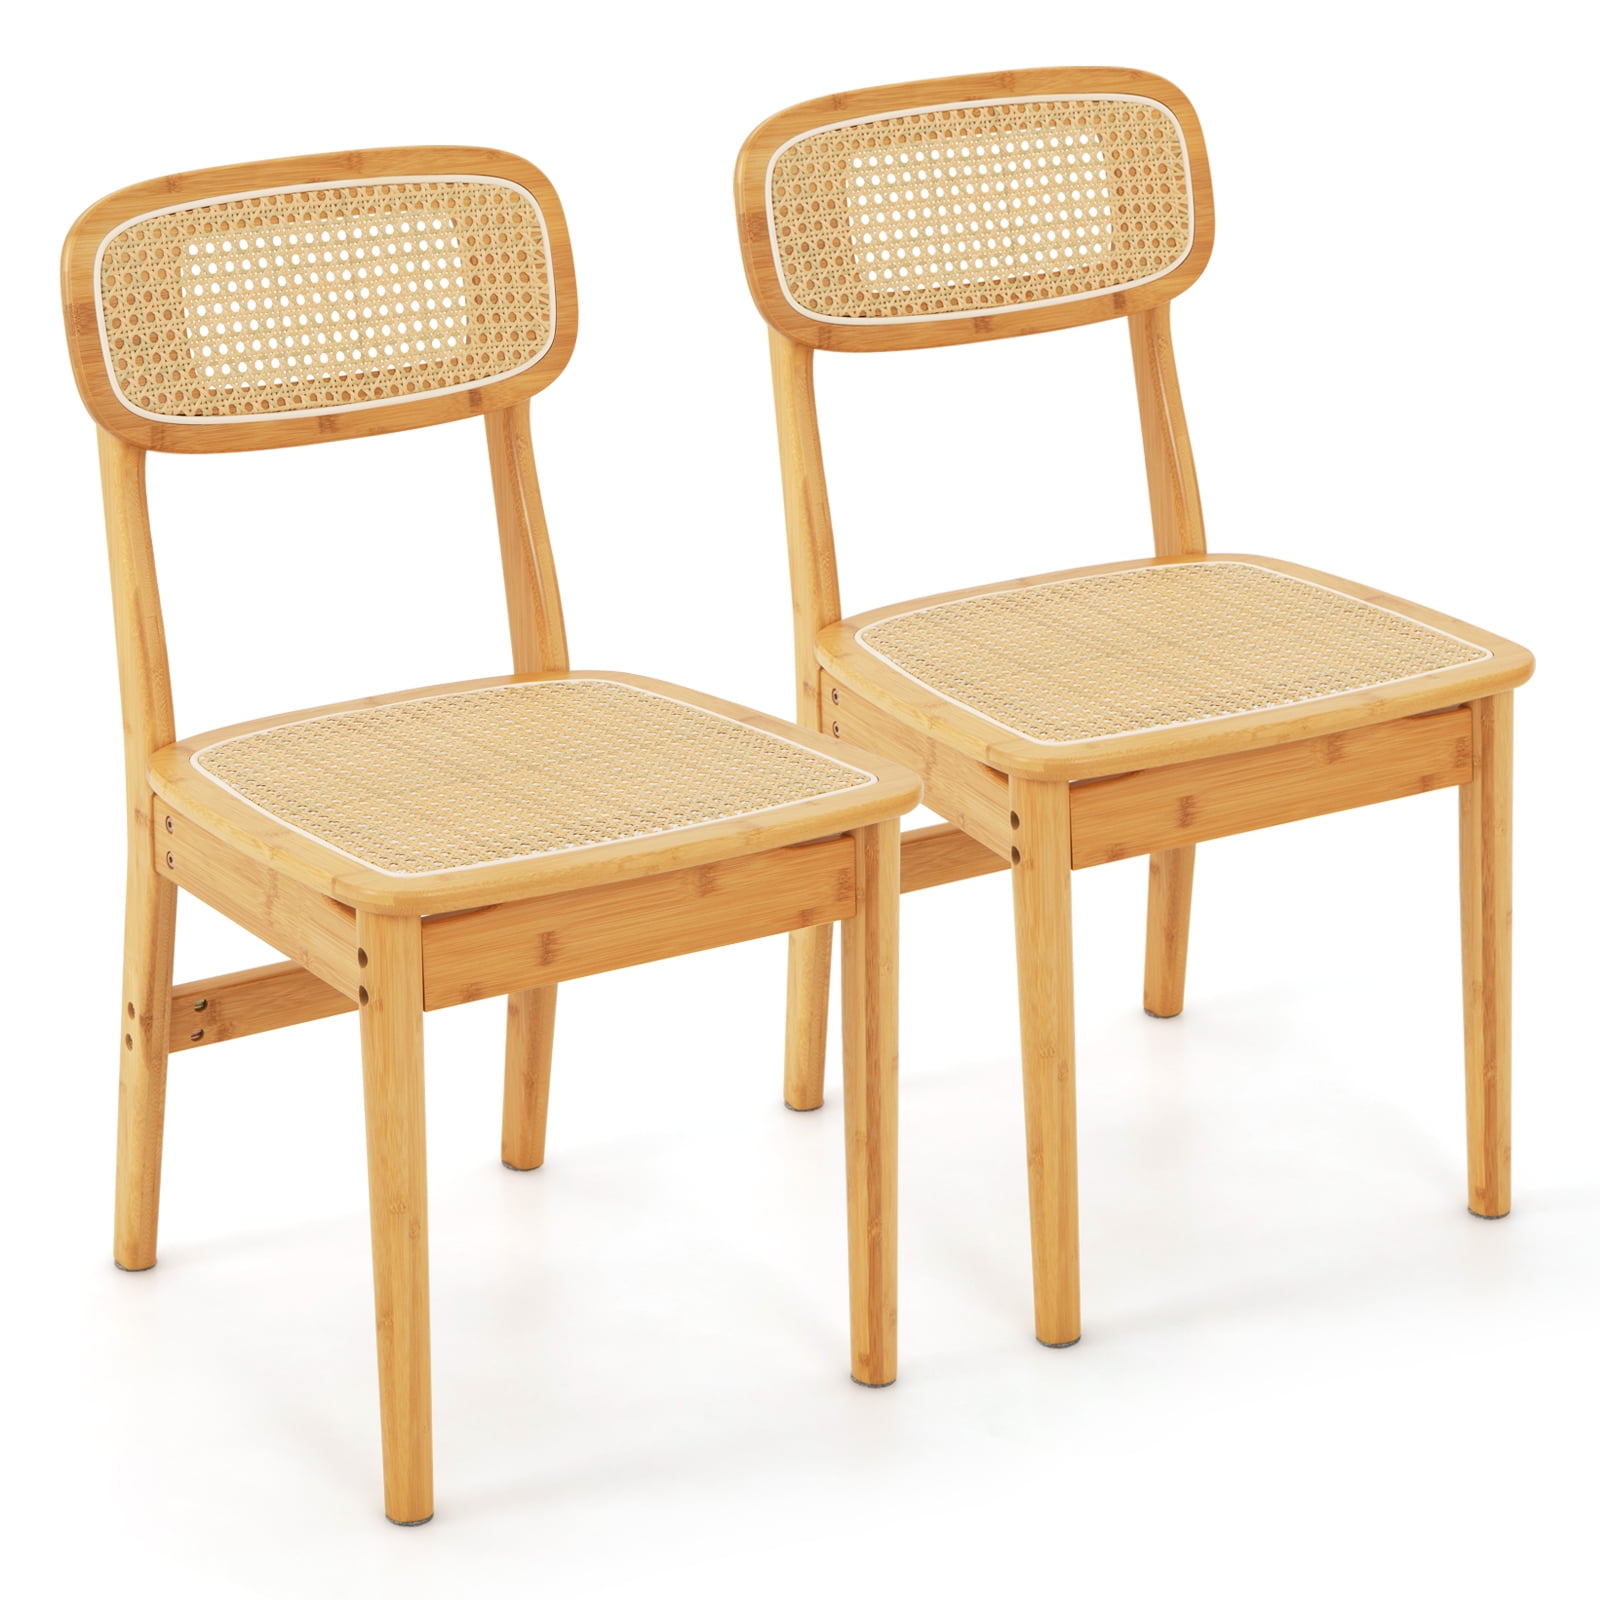 Topbuy Rattan Dining Chairs Set of 2 Kitchen Dining Chairs with ...